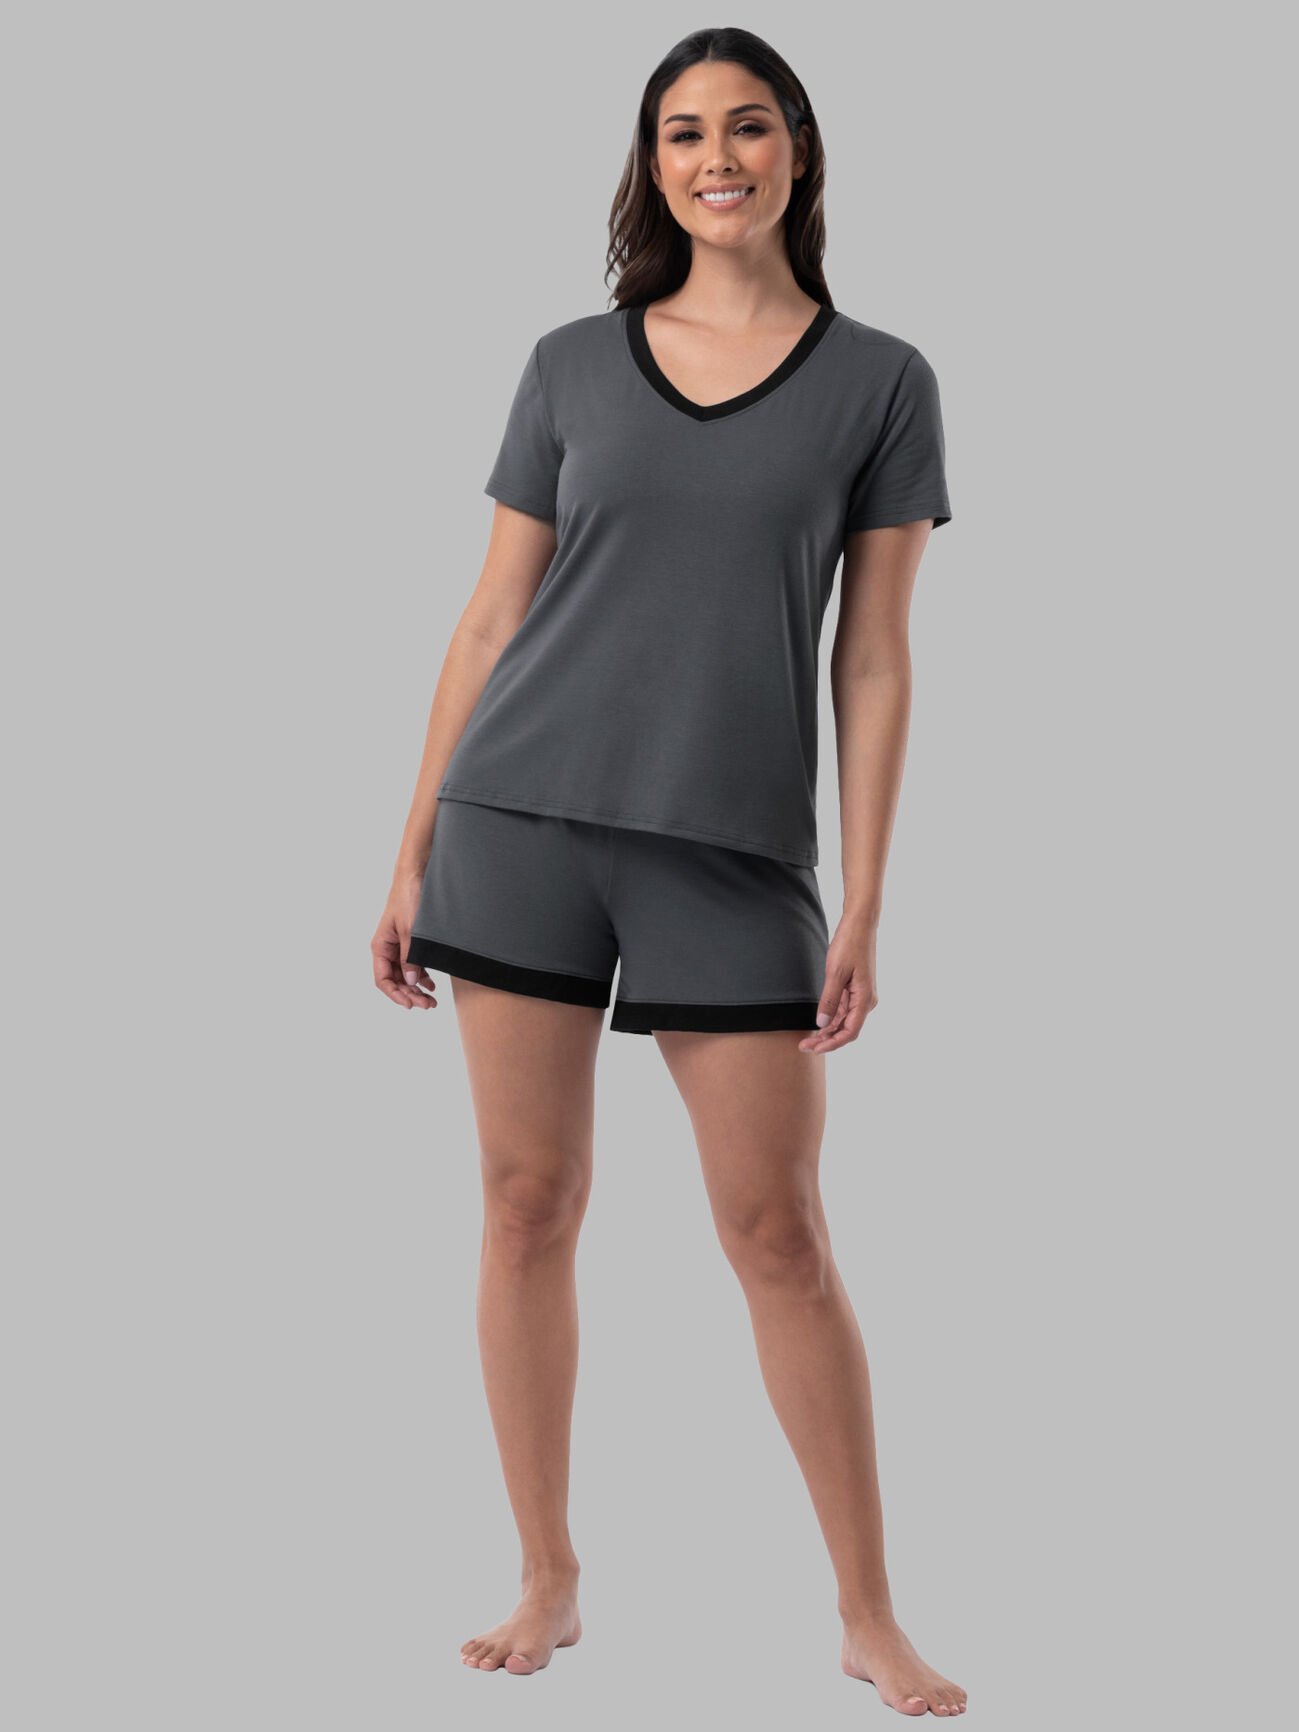 Women's Soft & Breathable V-Neck T-shirt and Shorts, 2-Piece